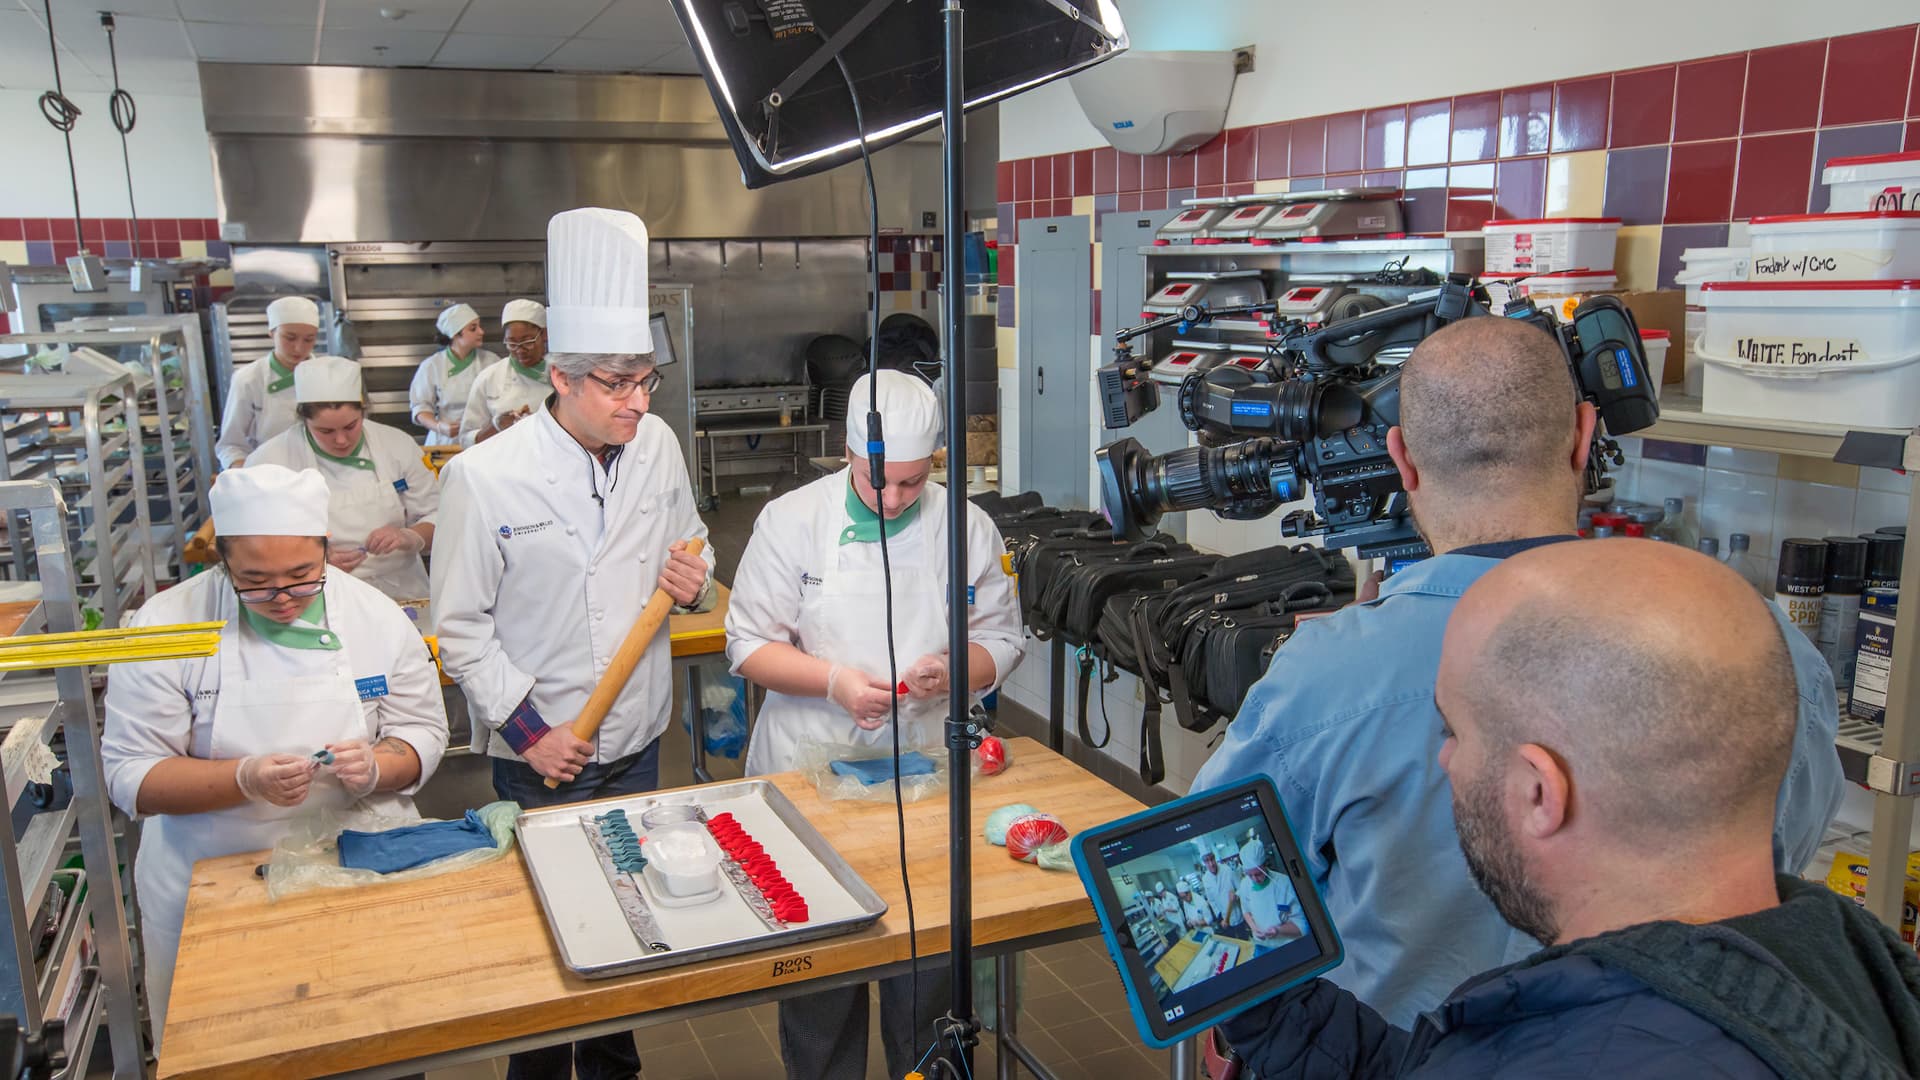 And action! JWU Providence students filming a Super Bowl segment with CBS correspondent Mo Rocca